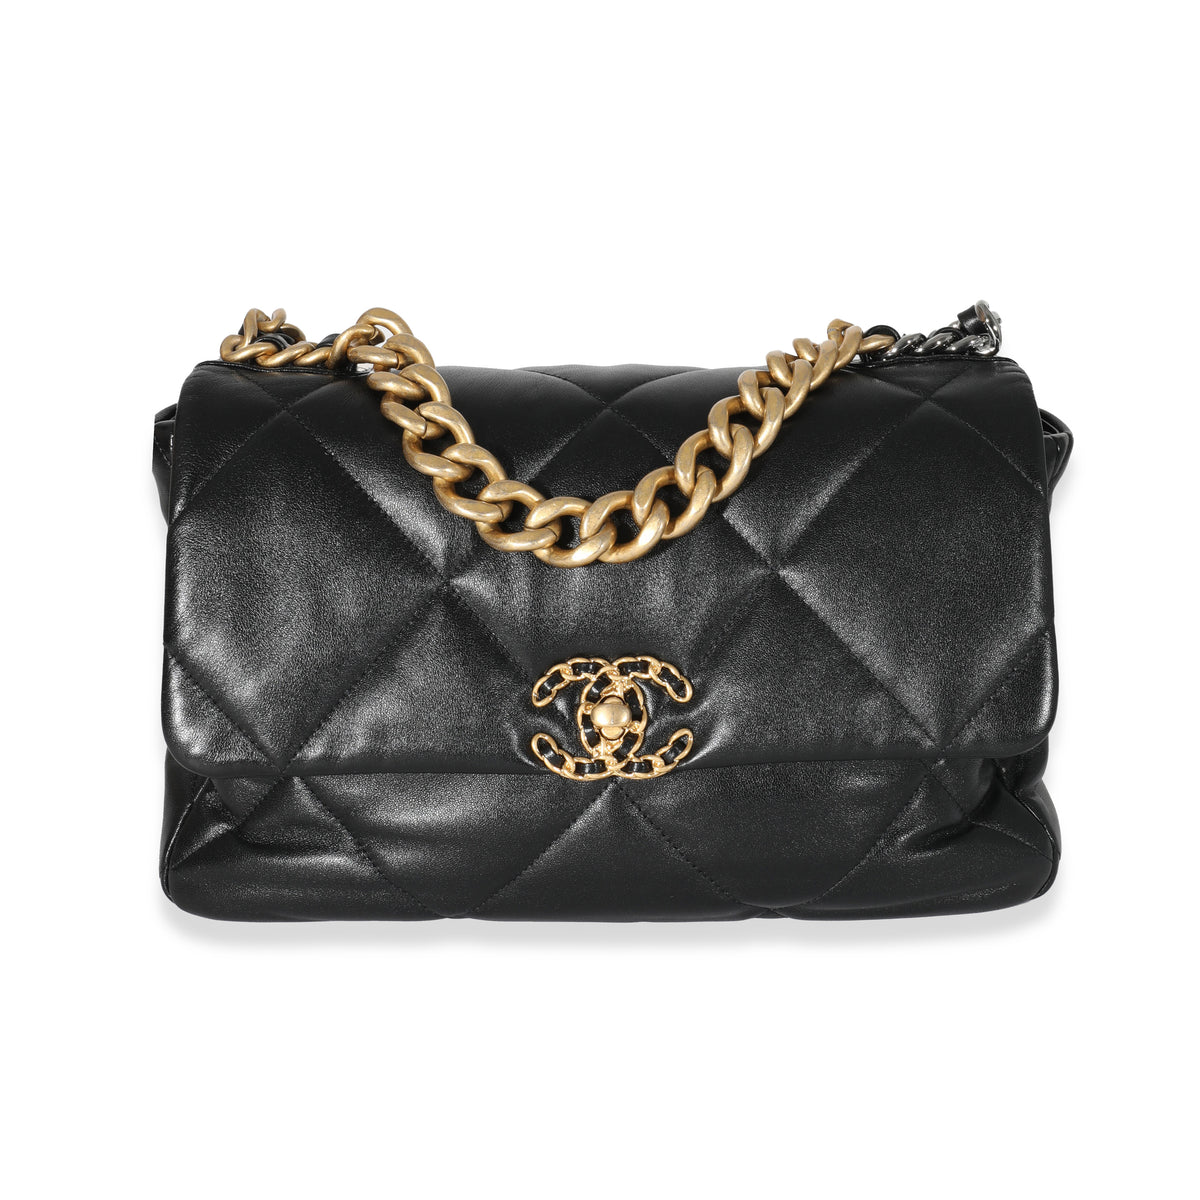 Chanel Black Quilted Lambskin Large Chanel 19 Flap Bag, myGemma, NZ